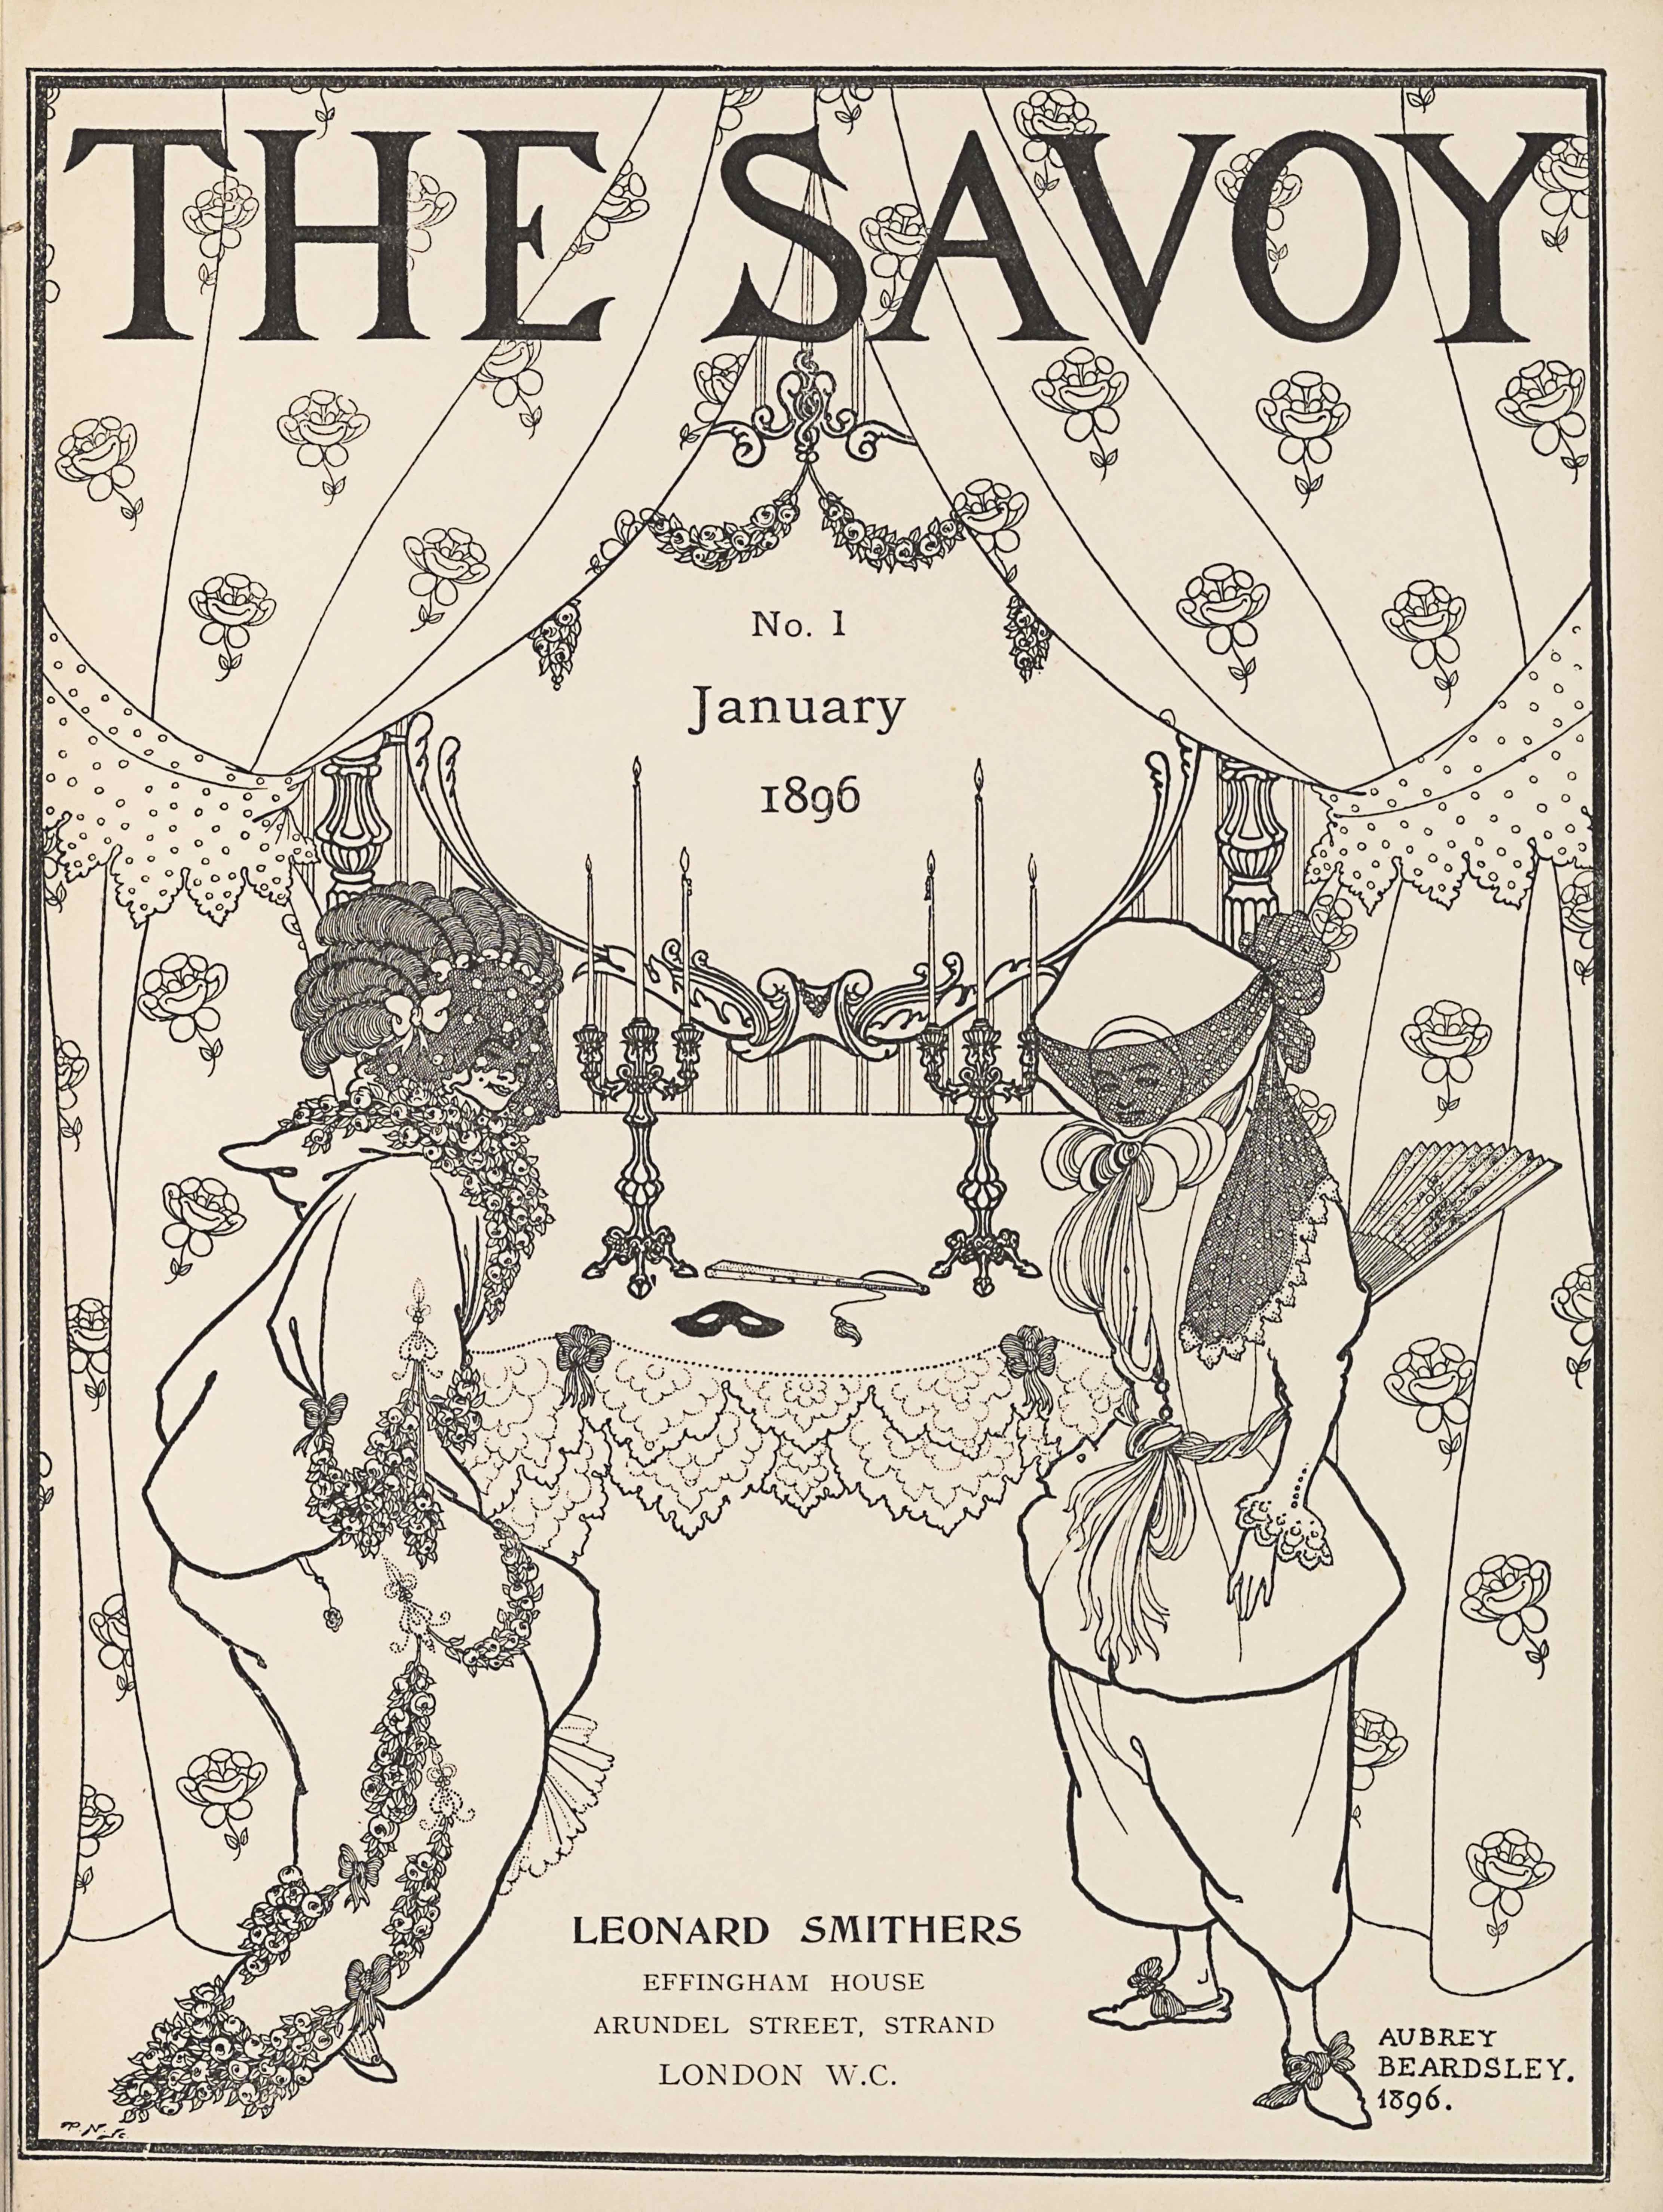 The title-page image, in portrait orientation, combines a line-block reproduction of a pen-and-ink design with letterpress. The title, “THE SAVOY” [caps], appears in the top fifth of the page. At the top of the page behind the title, curtains adorned with rose flowers are split open, spanning the width of the page to descend the margins on each side. The curtains are tied off to the side with polka dotted fabric cut in decorative points jutting down at about the top third of the page. The curtains extend to nearly the base of the page, taking up a quarter of the page in width on each side. Behind the split curtains, and covered slightly by them, is an ornamented mirror that starts at the base of the title and extends down until the halfway point on the page, taking up the middle third of the page in width. The text “No. 1” appears within the mirror below two draped garlands of flowers. Also within the mirror is the text “January” and then, one line below, the text: “No. 1,” and one line down again from that is the text “1896.” Below and in front of the mirror, in the mid-ground, is a table that holds two symmetrically placed three-tiered candlestick holders with lit candles extending up to the halfway point on the mirror. On the table between the candlestick holders is a black mask and a closed up, tasseled fan. The table is covered with a plain cloth that has two layers of doilies at the edge falling in front of the table. Two bows sit on the edge of the table cloth in front of each of the two candlestick holders. Standing in the foreground, to the left and right of the table, are two women. They take up just over half the page in height and about a quarter of the width each. The woman on the left is leaning forward, facing to the right, and shows a two-thirds profile of her face. She is dressed in a plain, baggy, hooded long-sleeve top and a long skirt. Bunches of flowers are tied around her neck and also at the hem of her shirt sleeve, and draped in two layers on her skirt. Her hair is tied up atop her head in coiled rows, with about four bows lined in a crown and a veil covering her face. The woman on the right is facing to the left and showing a three-quarters profile. She is dressed in a buttoned tunic coat with puffy upper sleeves that tighten at the forearm and have a ruffled sleeve. The coat is made tight at the waist with a twisted fabric belt and the same material appears tied around her neck with a large bow at her chin. She wears baggy pants that reach just below the knee and show off bowed slippers on her feet. Atop her head is a large bonnet that covers all of her hair and ears. A veil covers her face and is tied at the back of her hat, with the excess material from the tie draping down across her left shoulder. A large fan emerges from her back, slightly spread and decorated with a floral pattern. Between the two women is mostly blank space until the centre foreground at the very bottom of the page where there is publishing information. Here appears the text: “LEONARD SMITHERS” [caps] and in the line below in slightly less bold font “EFFINGHAM HOUSE” [caps], and in the line below that: “ARUNDEL STREET, STRAND” [caps], and in the last line below: “LONDON W.C.” [caps].. In the bottom right corner there is text in three rows, the first is: “AUBREY” [caps], the second line down is: “BEARDSLEY.” [caps], and the third line is: “1896.” The page is bordered in a double-line, with the inner line four-times the thickness of the exterior.